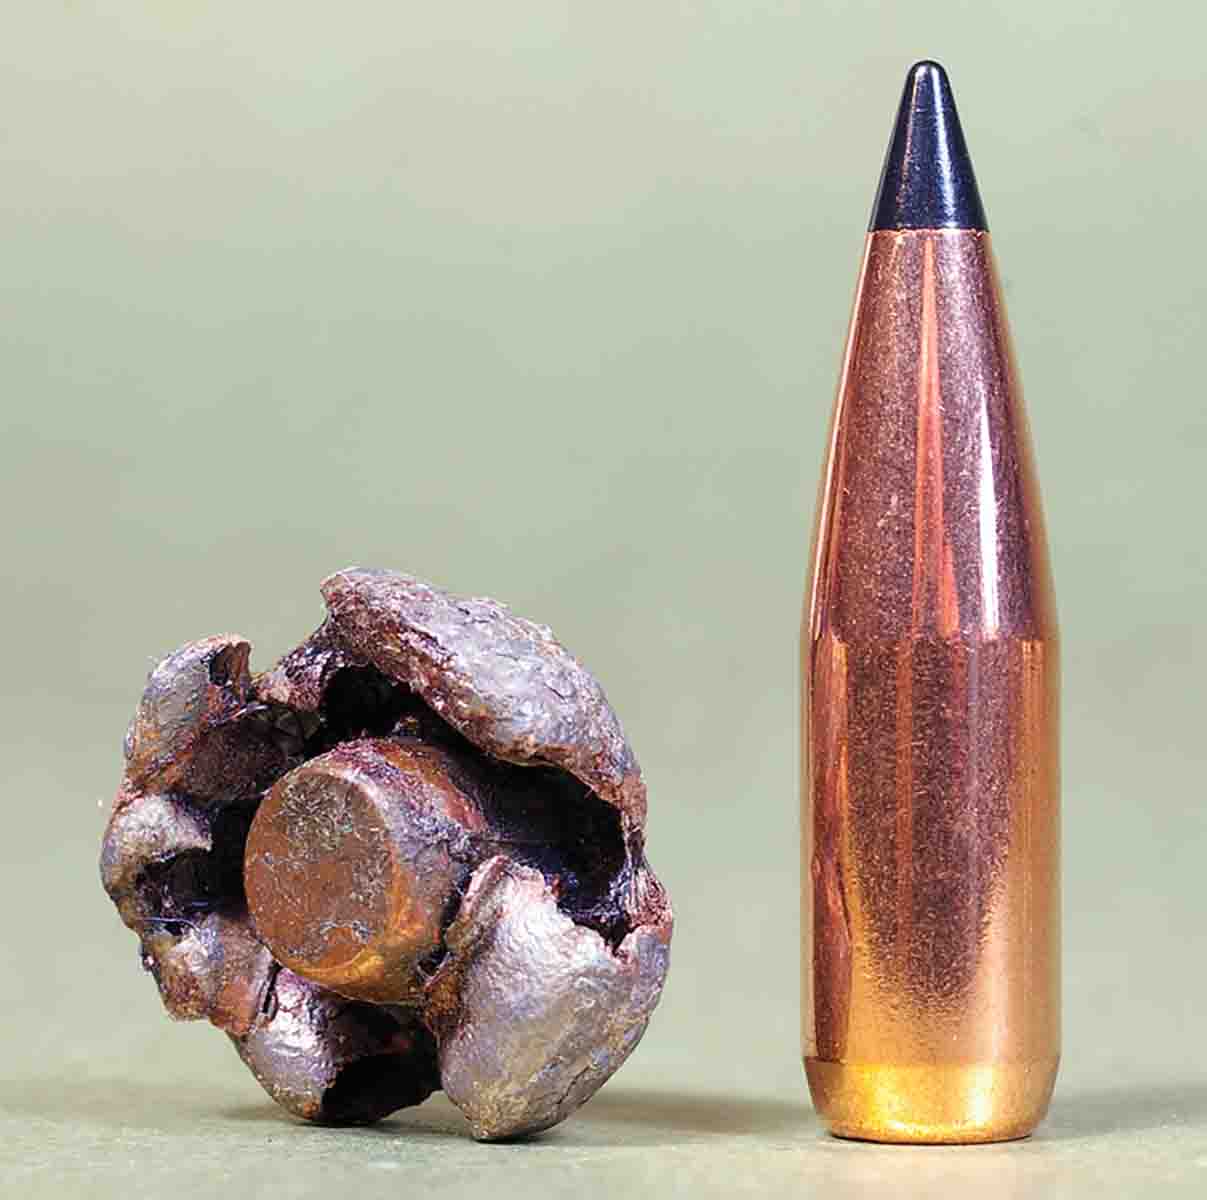 This 150-grain Scirocco fired from a .30-06 was retrieved from an elk. The bullet held onto 135 grains of its original weight.